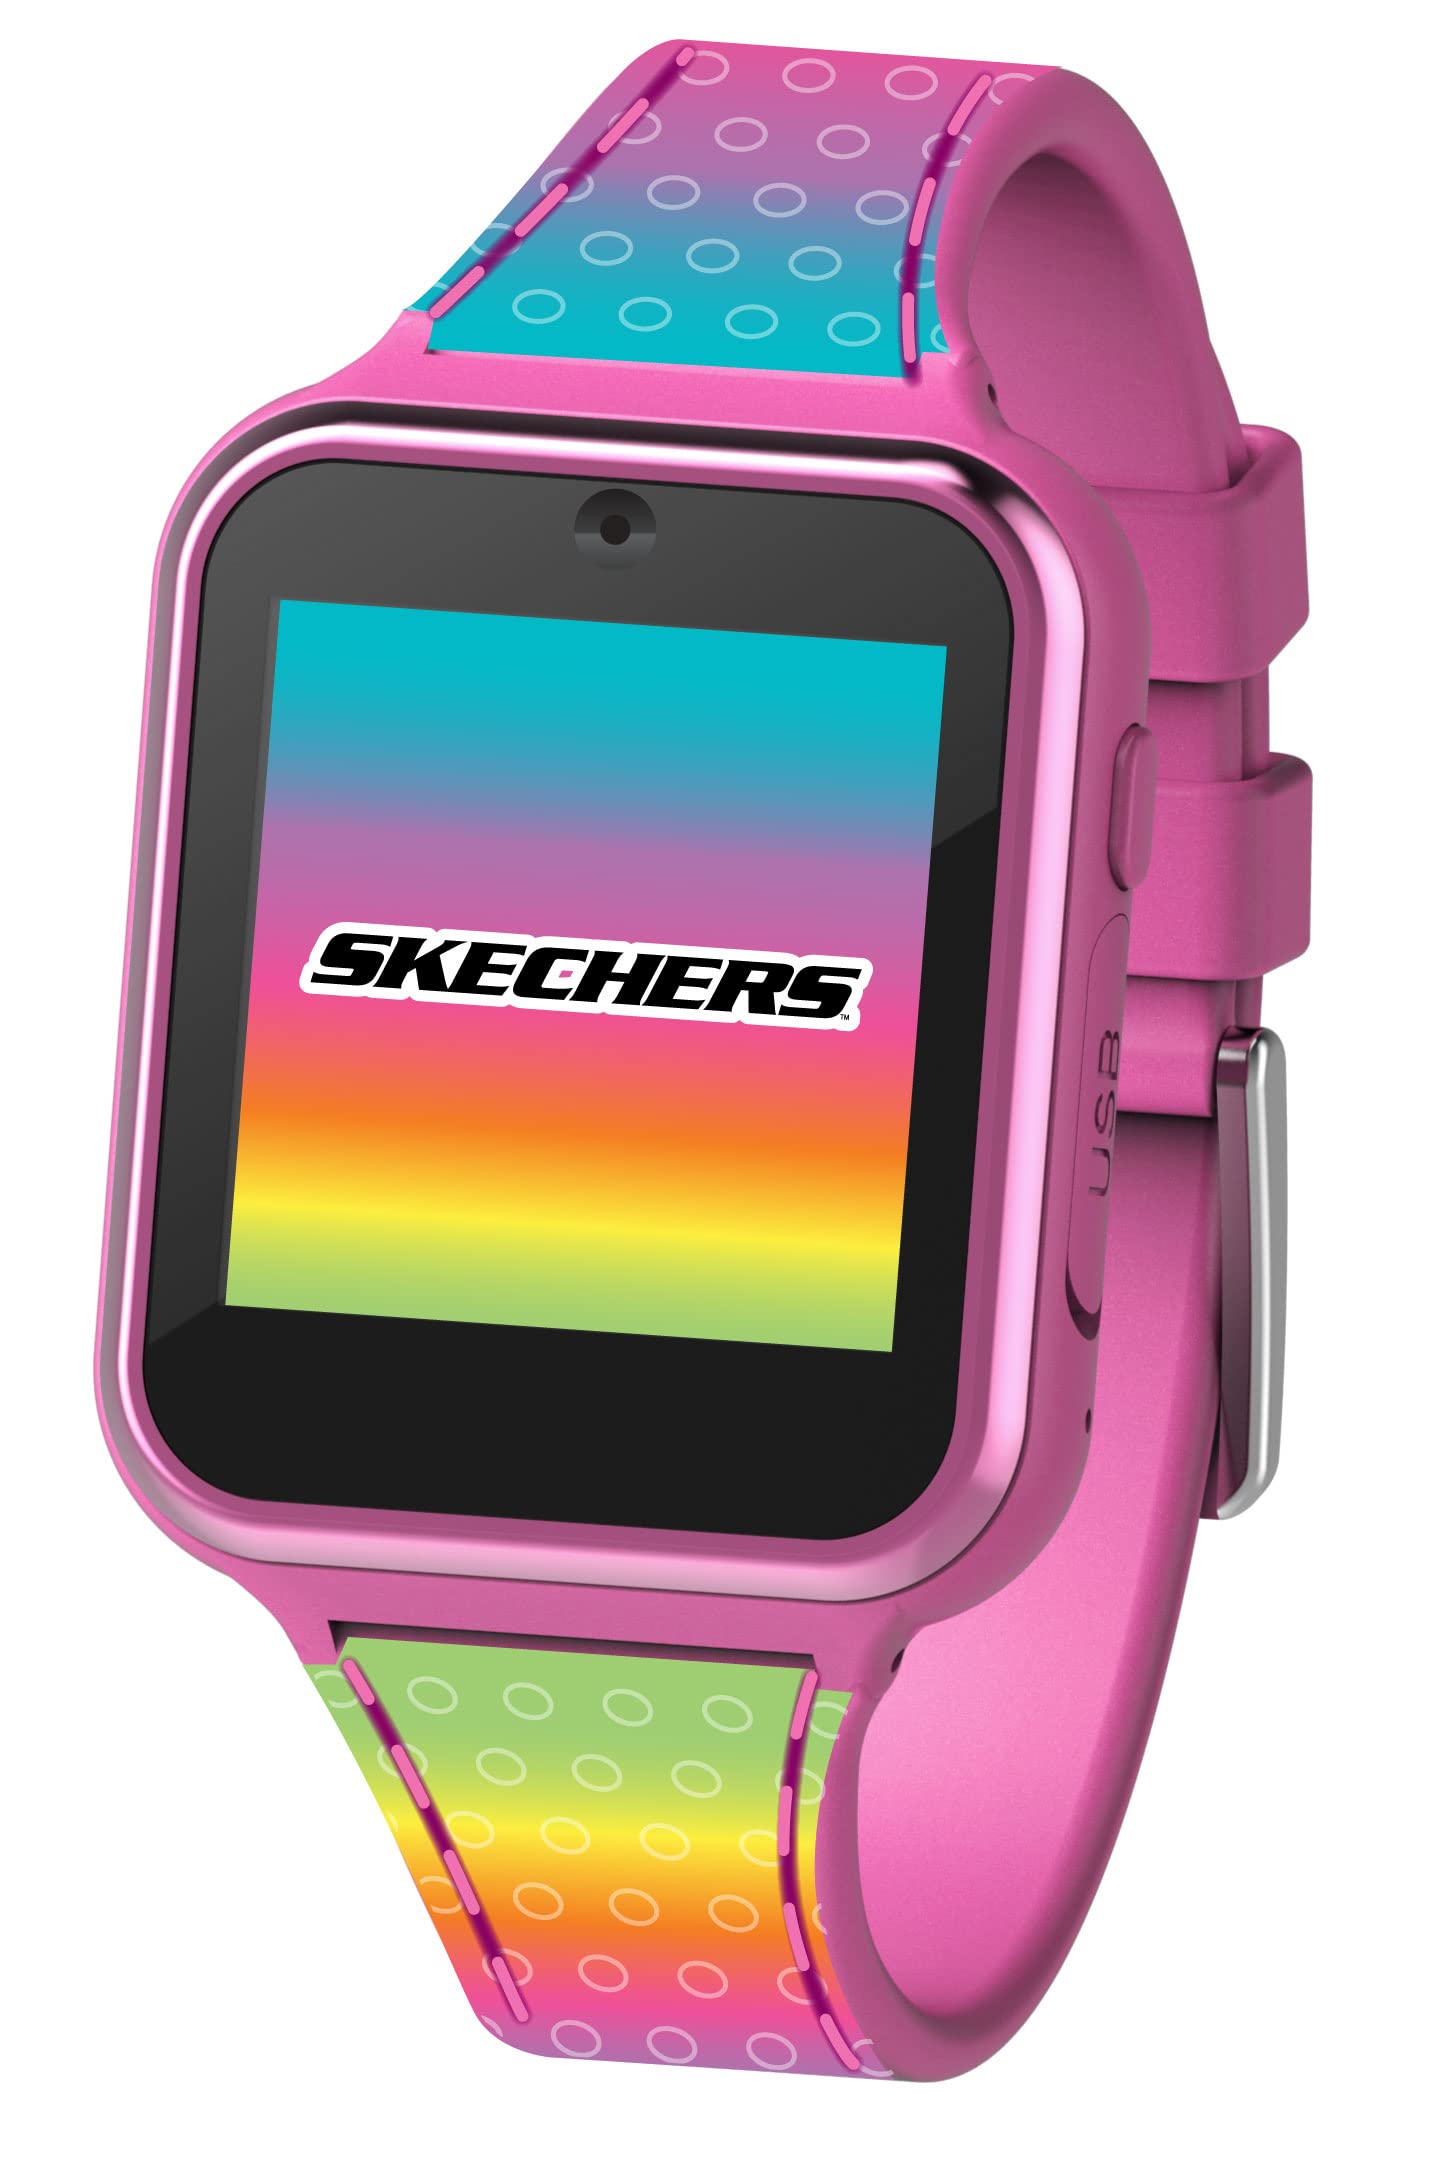 Accutime Skechers Kids Multi Color - Educational Learning Touchscreen Smart Watch Toy for Girls, Boys, Toddlers - Selfie Cam, Learning Games, Alarm, Calculator, Pedometer & More (Model: SKE4083)